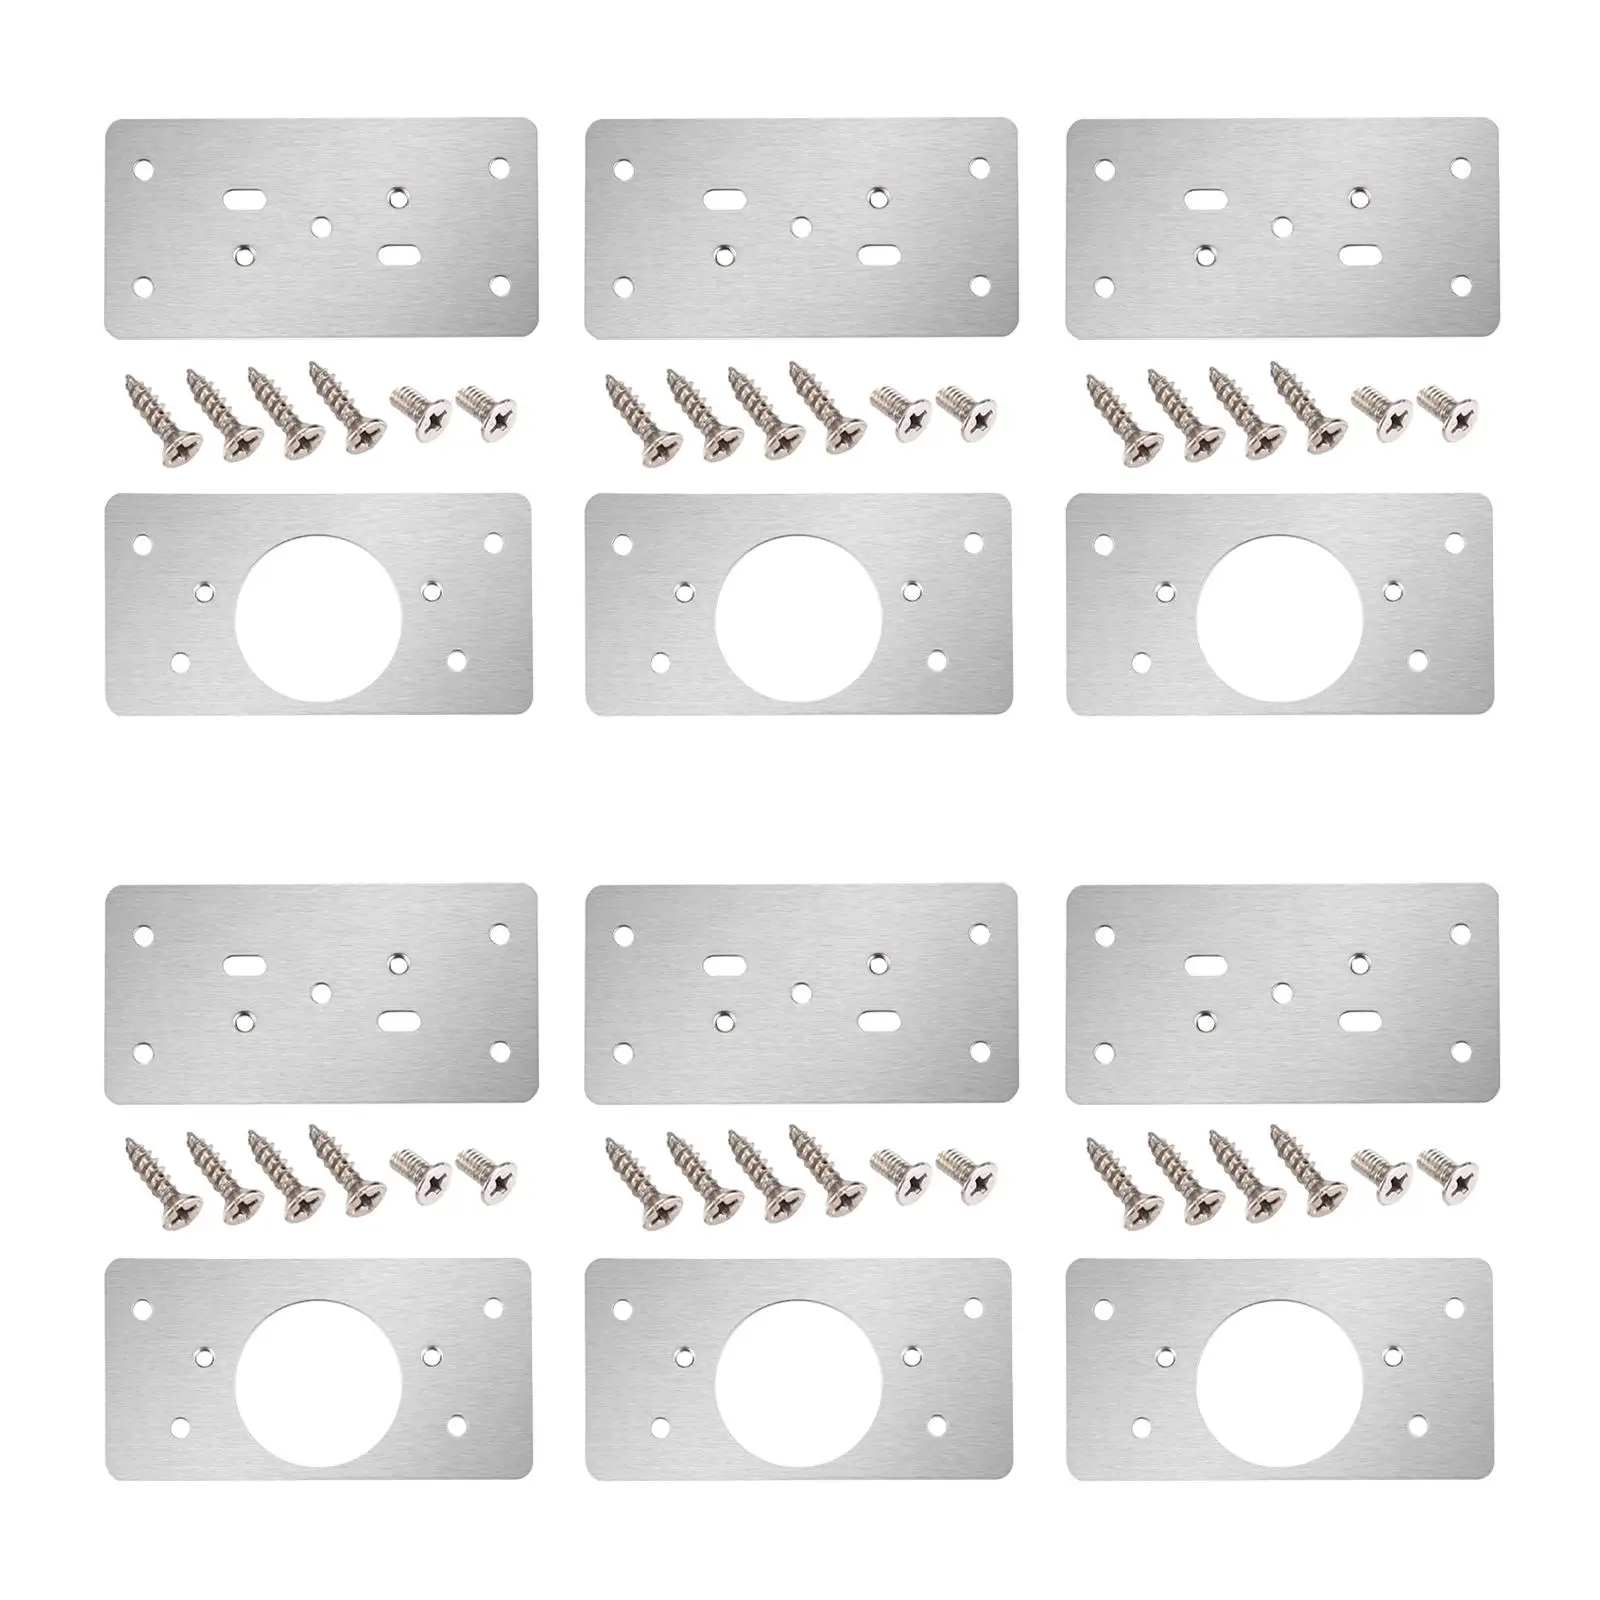 6Pcs Hinge Repair Replacement Kits Hinges Fixing Plates with Mounting Screws for